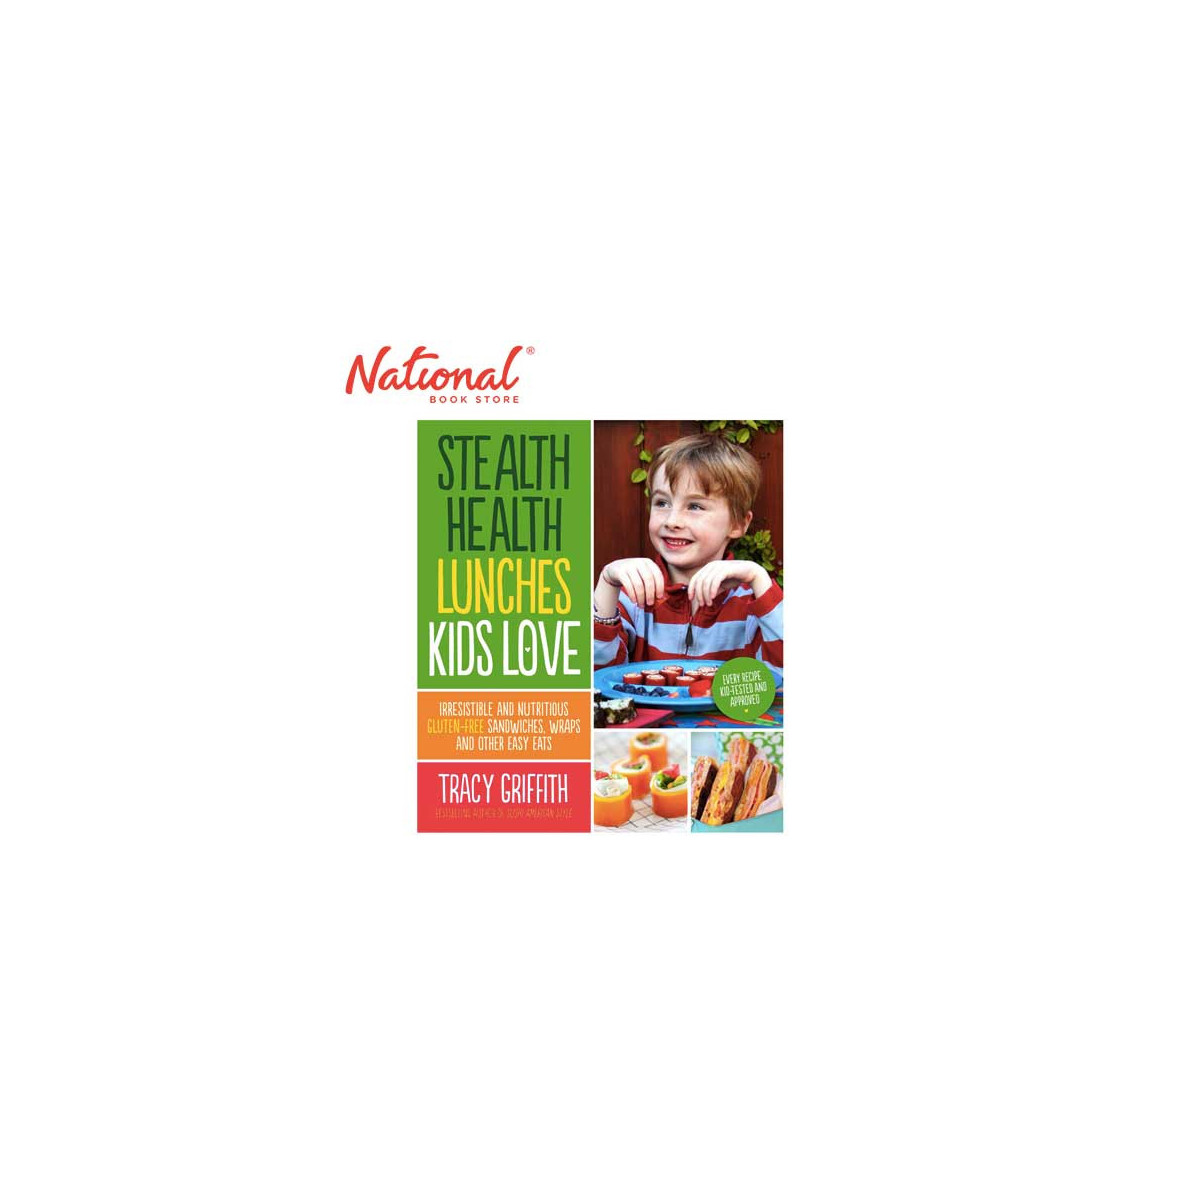 Stealth Health Lunches Kids Love by Tracy Griffith - Trade Paperback - Cookbooks